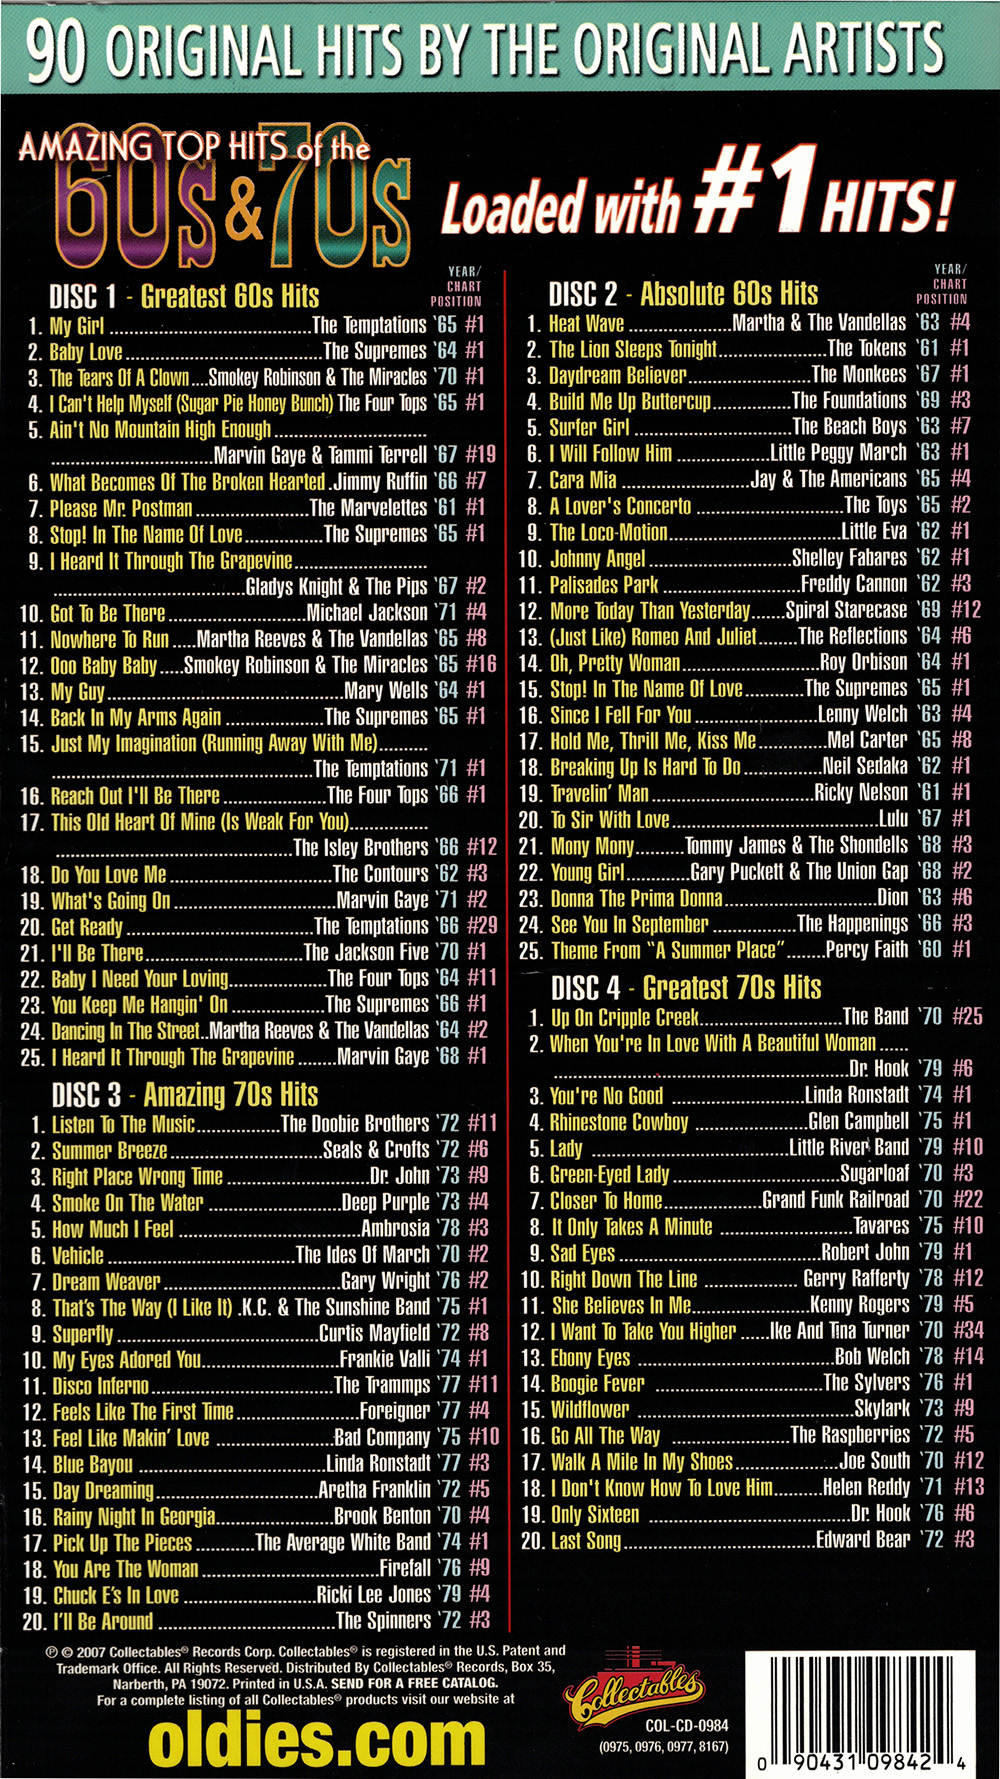 Amazing Top Hits Of The 60's & 70's (4 CD) - Click Image to Close